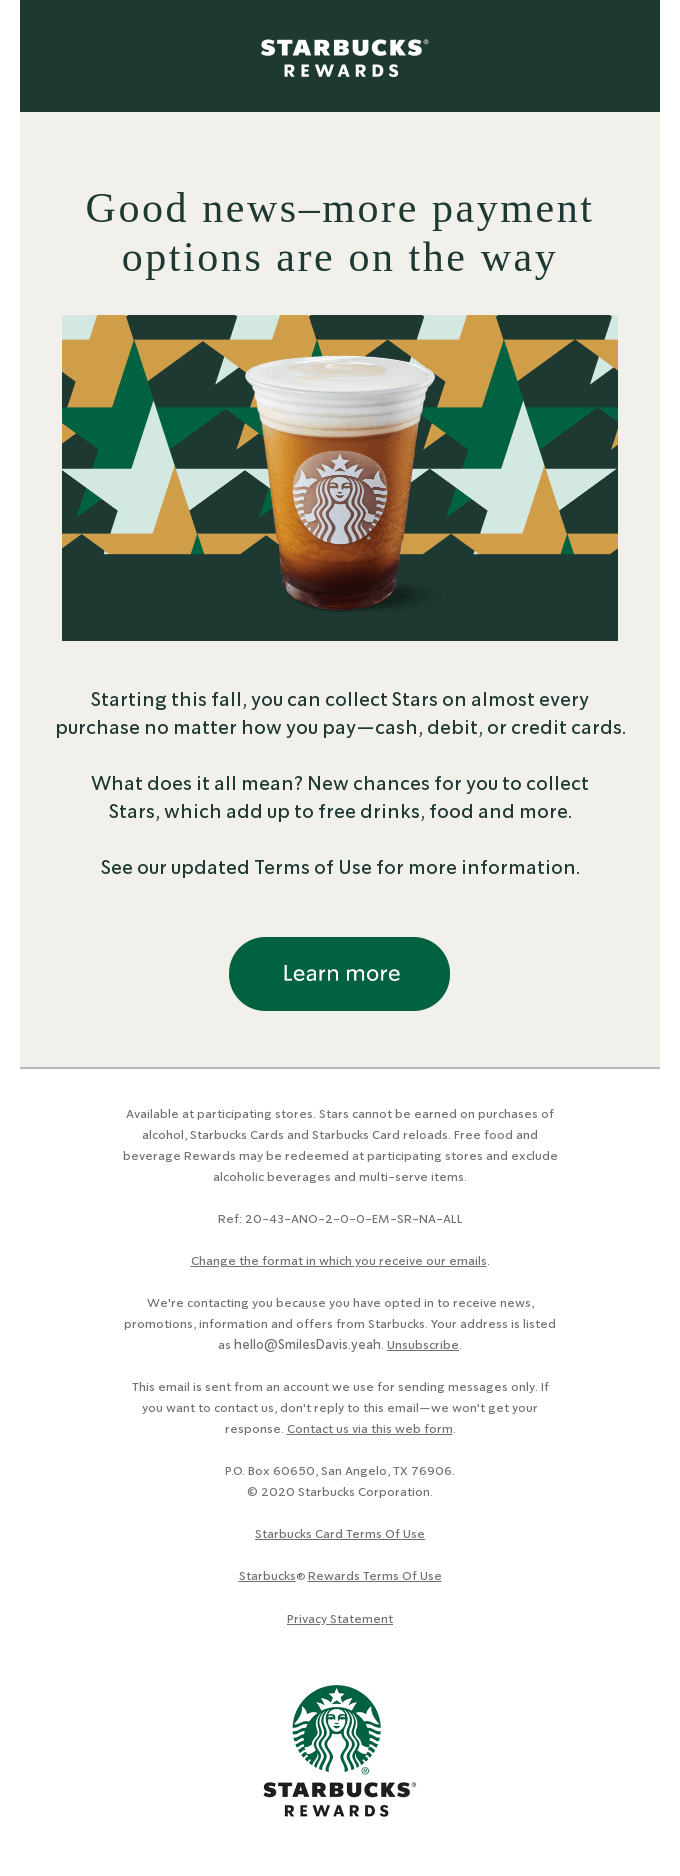 Coming soon, more ways to pay - Starbucks Email Newsletter